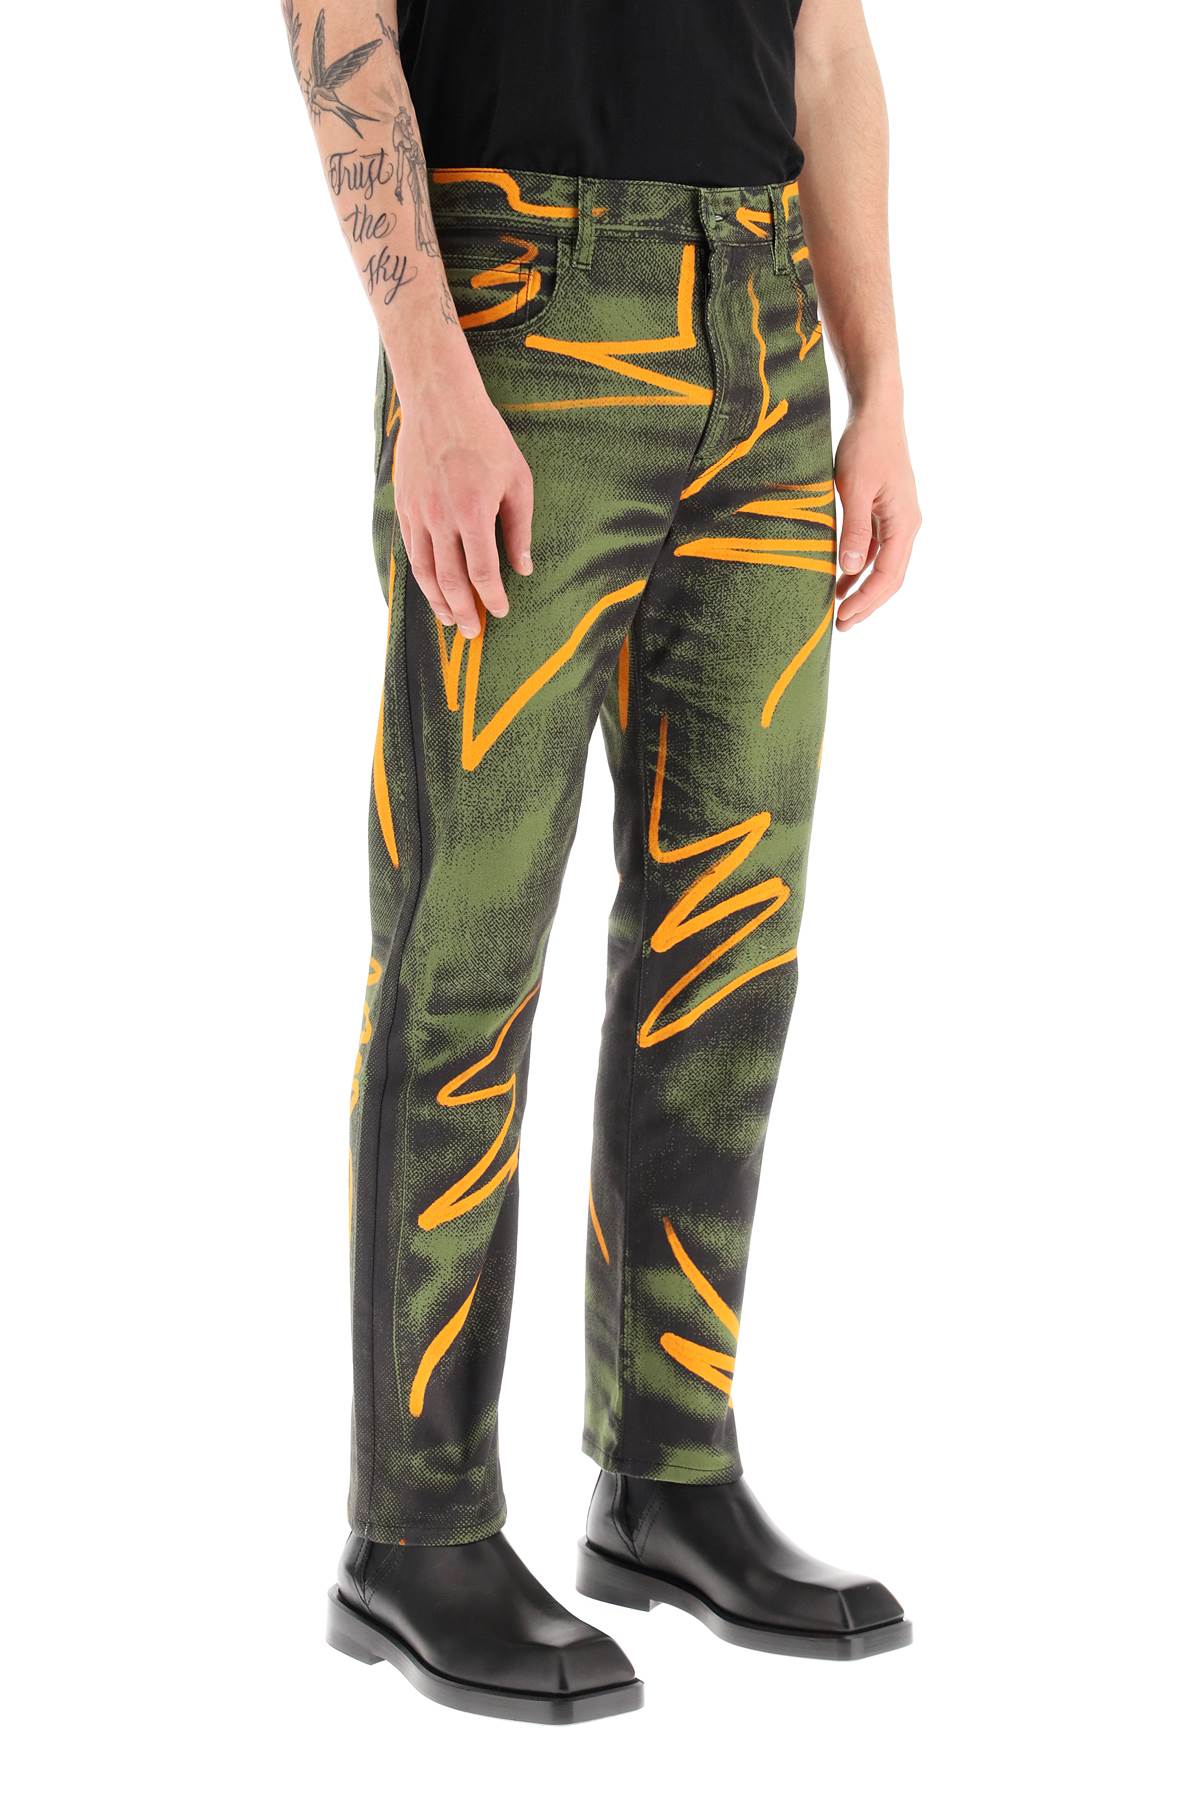 Moschino shadows & squiggles cotton pants-1